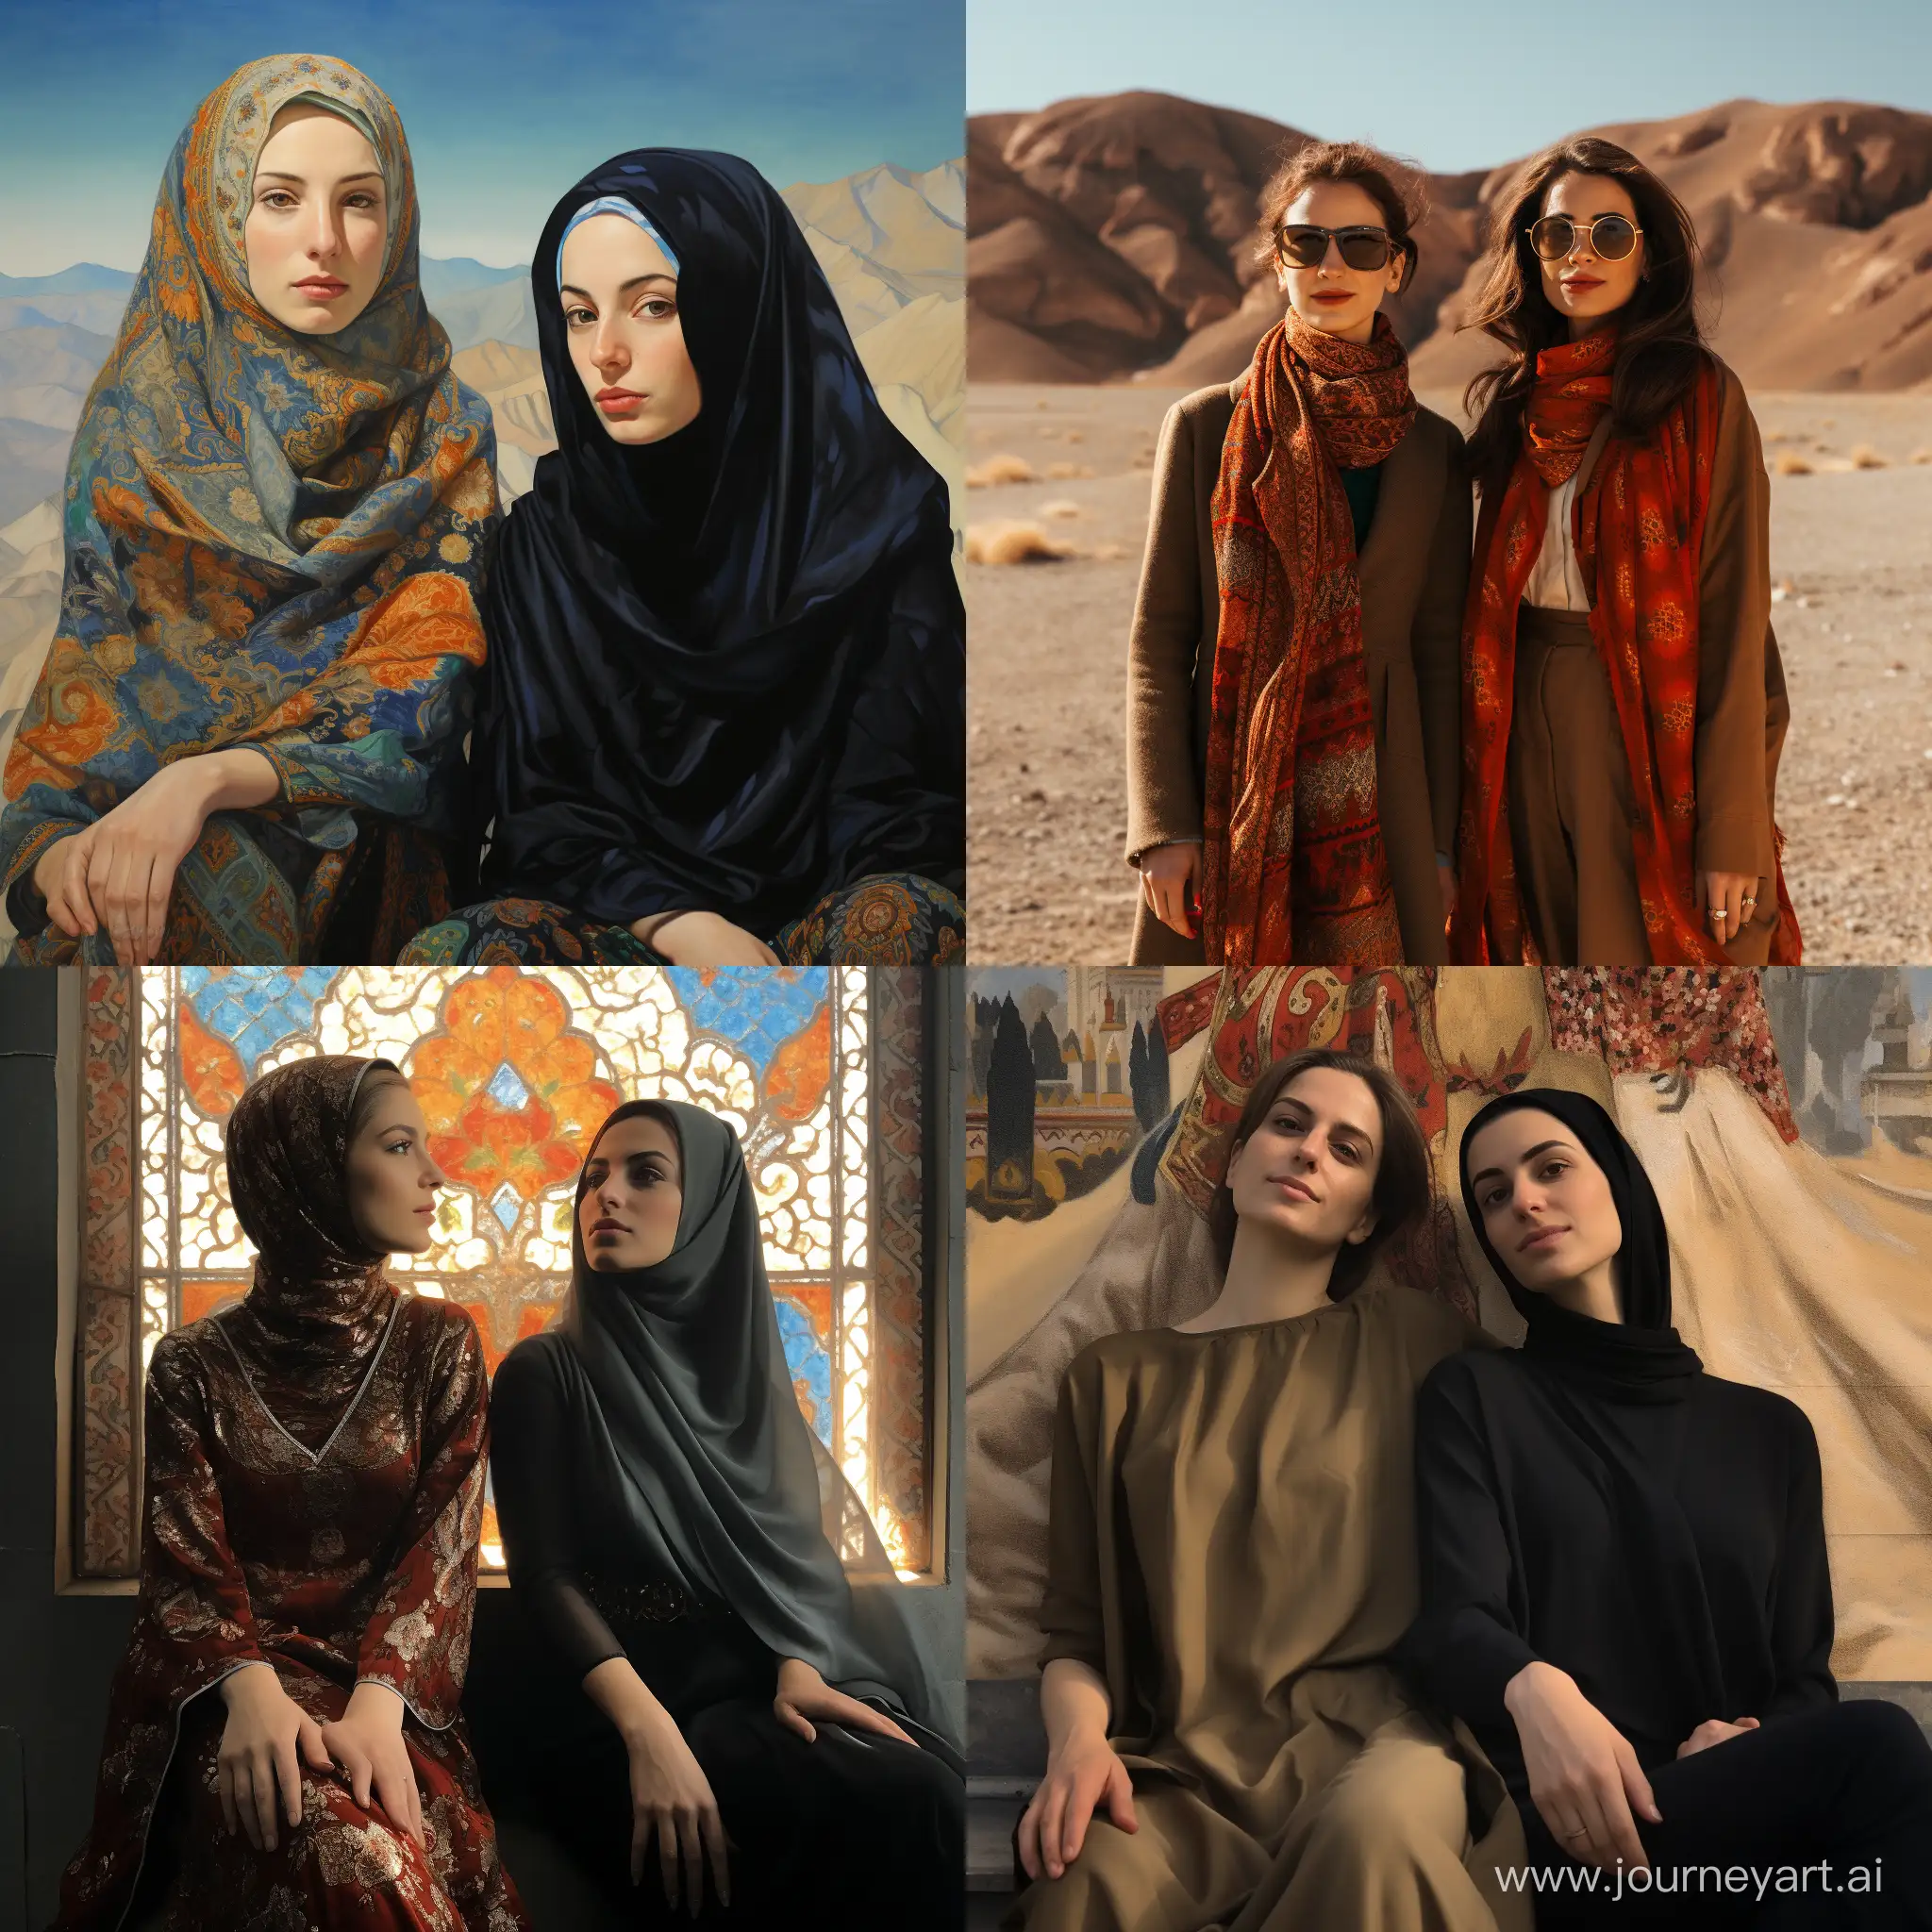 Iranian-Women-Embracing-Tradition-Cultural-Connection-in-a-11-Aspect-Ratio